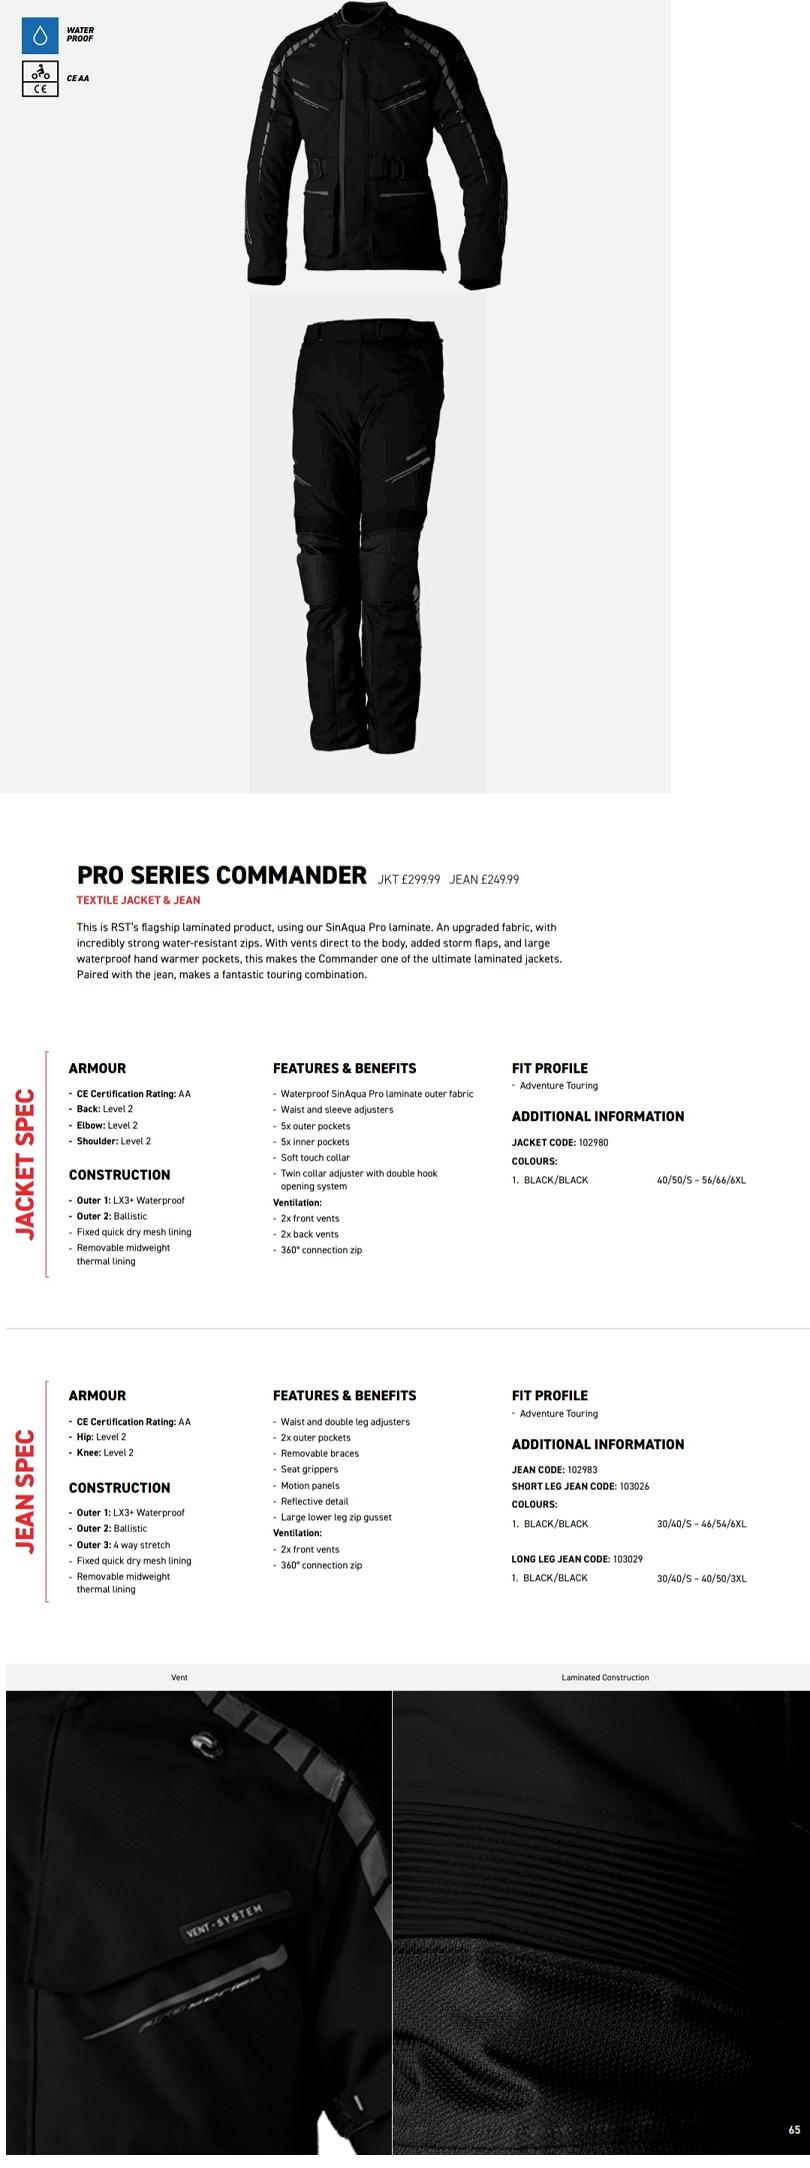 RST Pro Series Commander textile jacket and pant